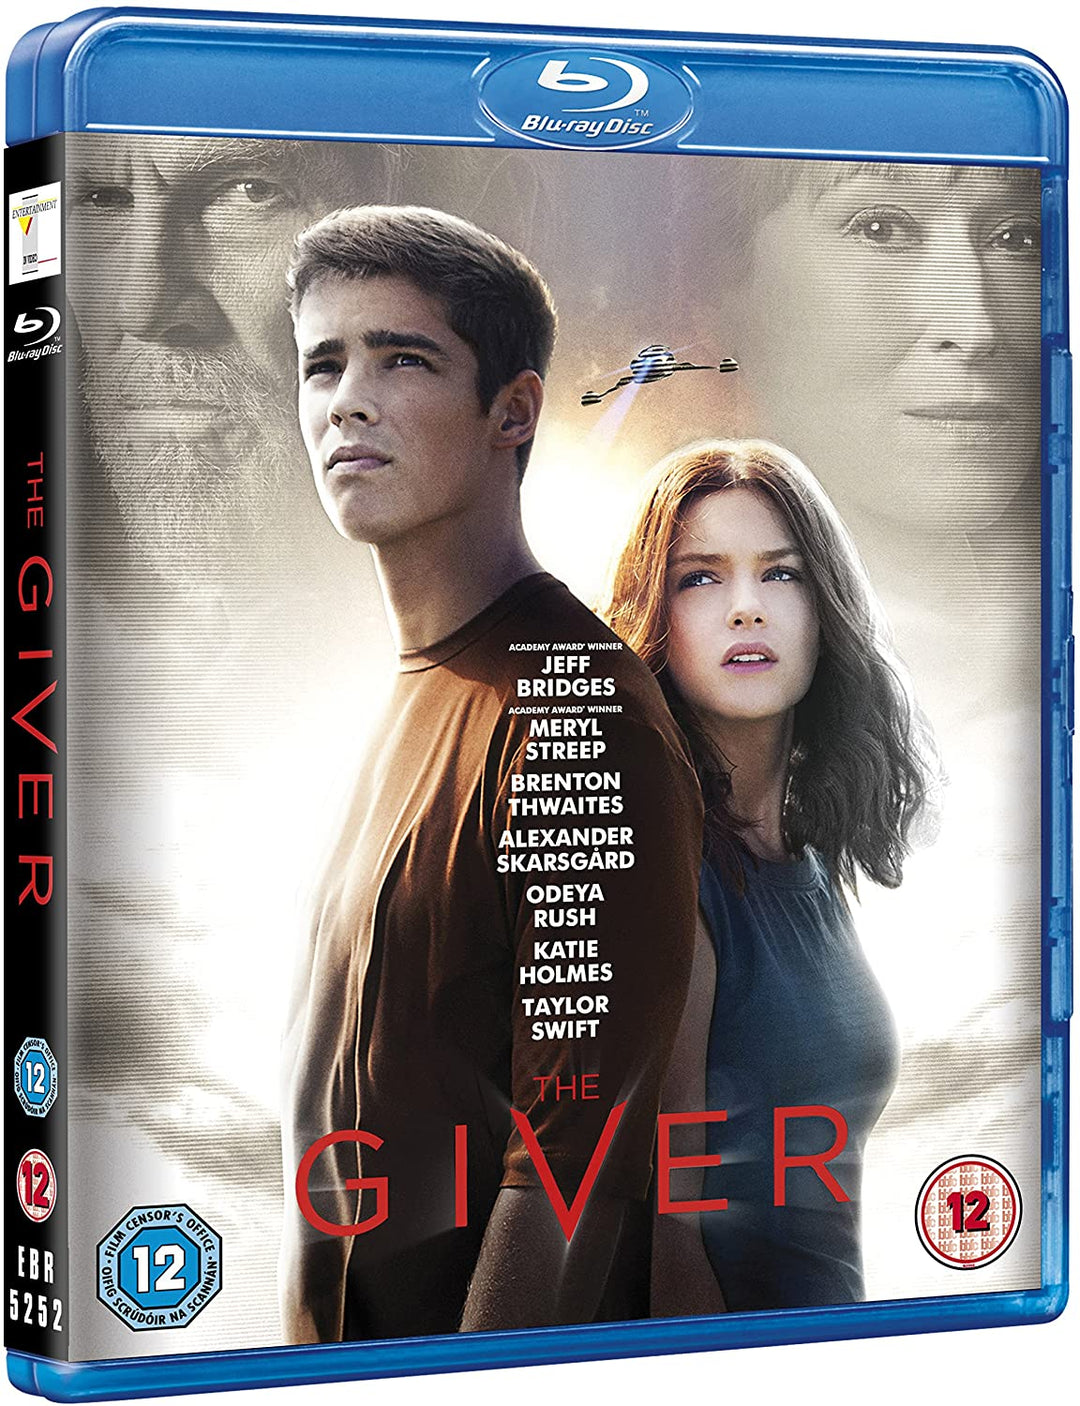 The Giver [Blu-ray] [2014]